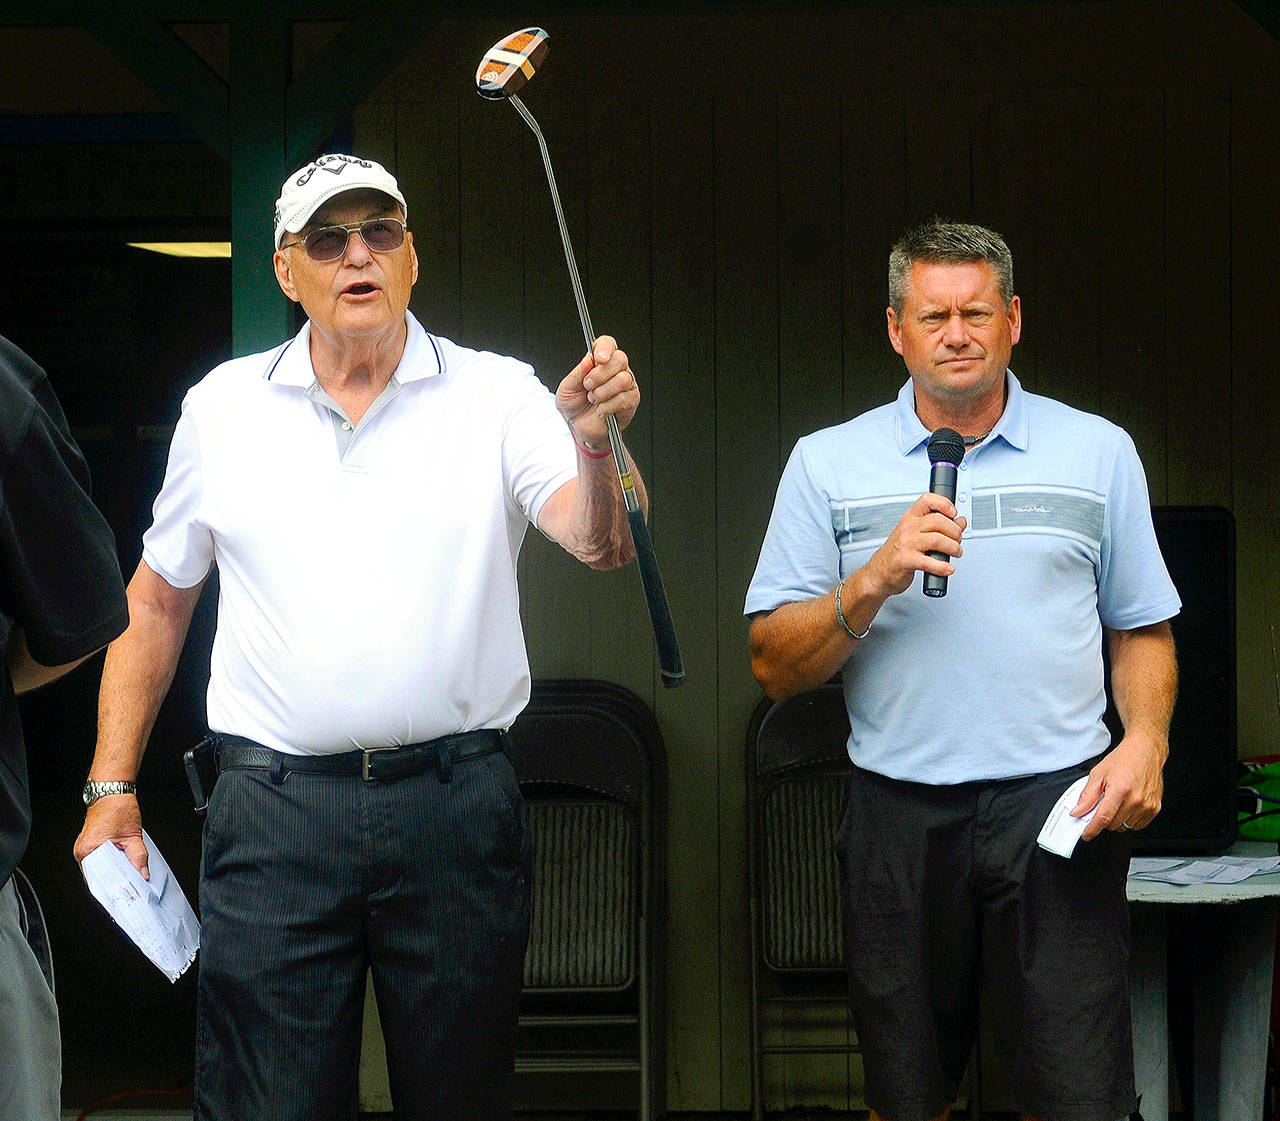 Take a Hack Against ALS Tournament chairman Harry Carthum, right, and Highland Golf Course Pro Ronnie Espedal auction off a putter at the conclusion of the charity golf tournament at Highland Golf Course on Saturday. (Hasani Grayson | Grays Harbor News Group)